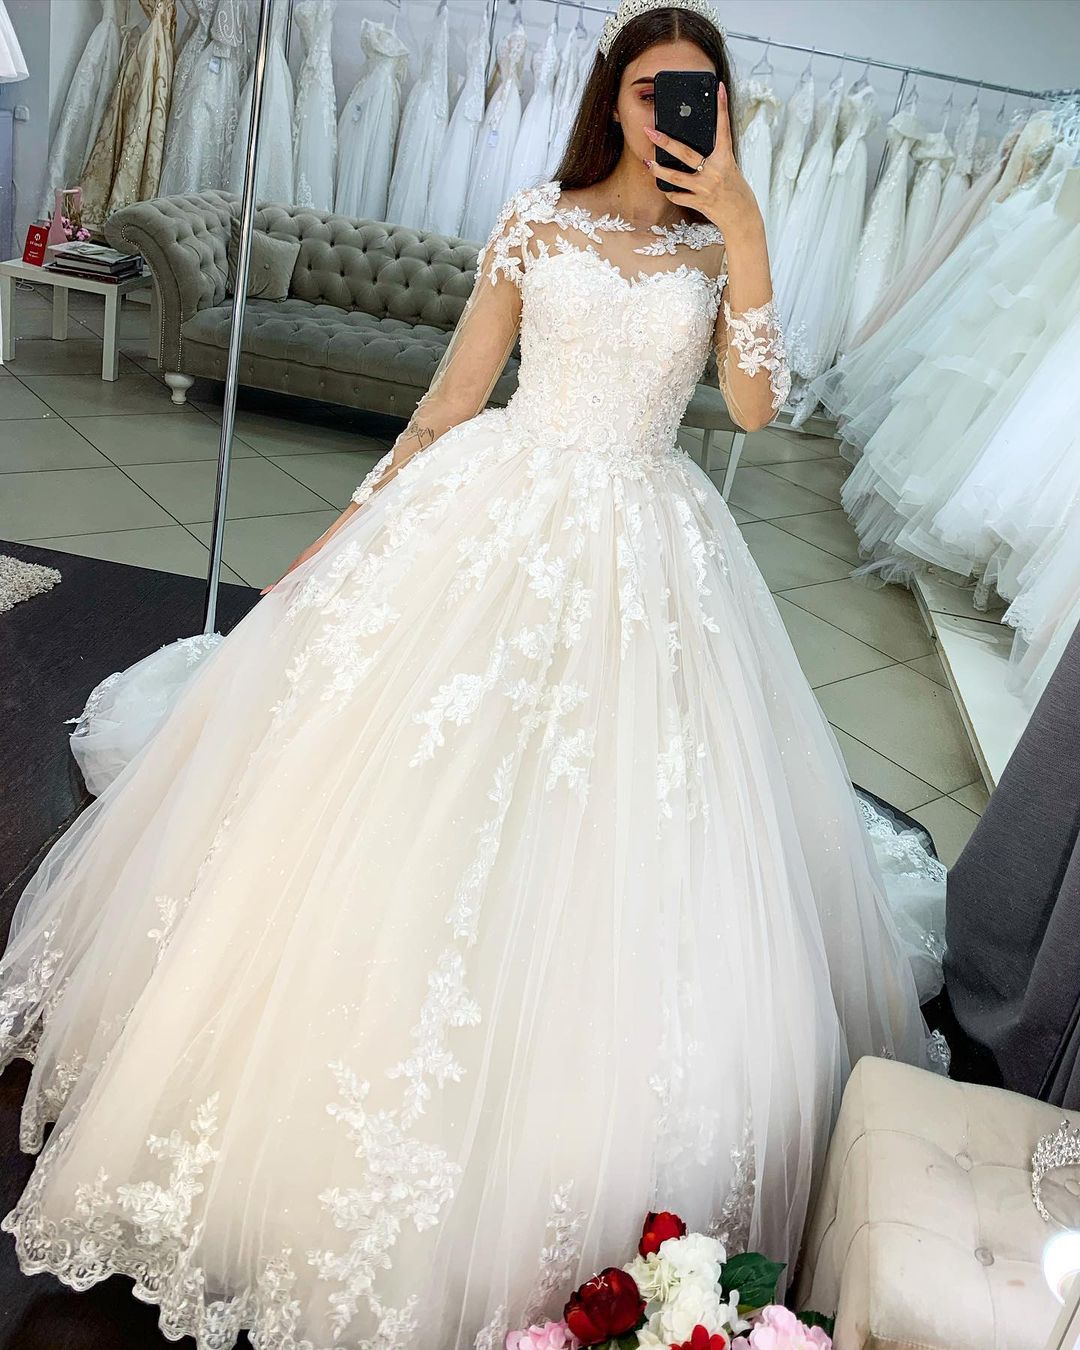 Classy Bateau Long Sleeve Princess Wedding Dress with Appliques and Lace Tulle-Wedding Dresses-BallBride